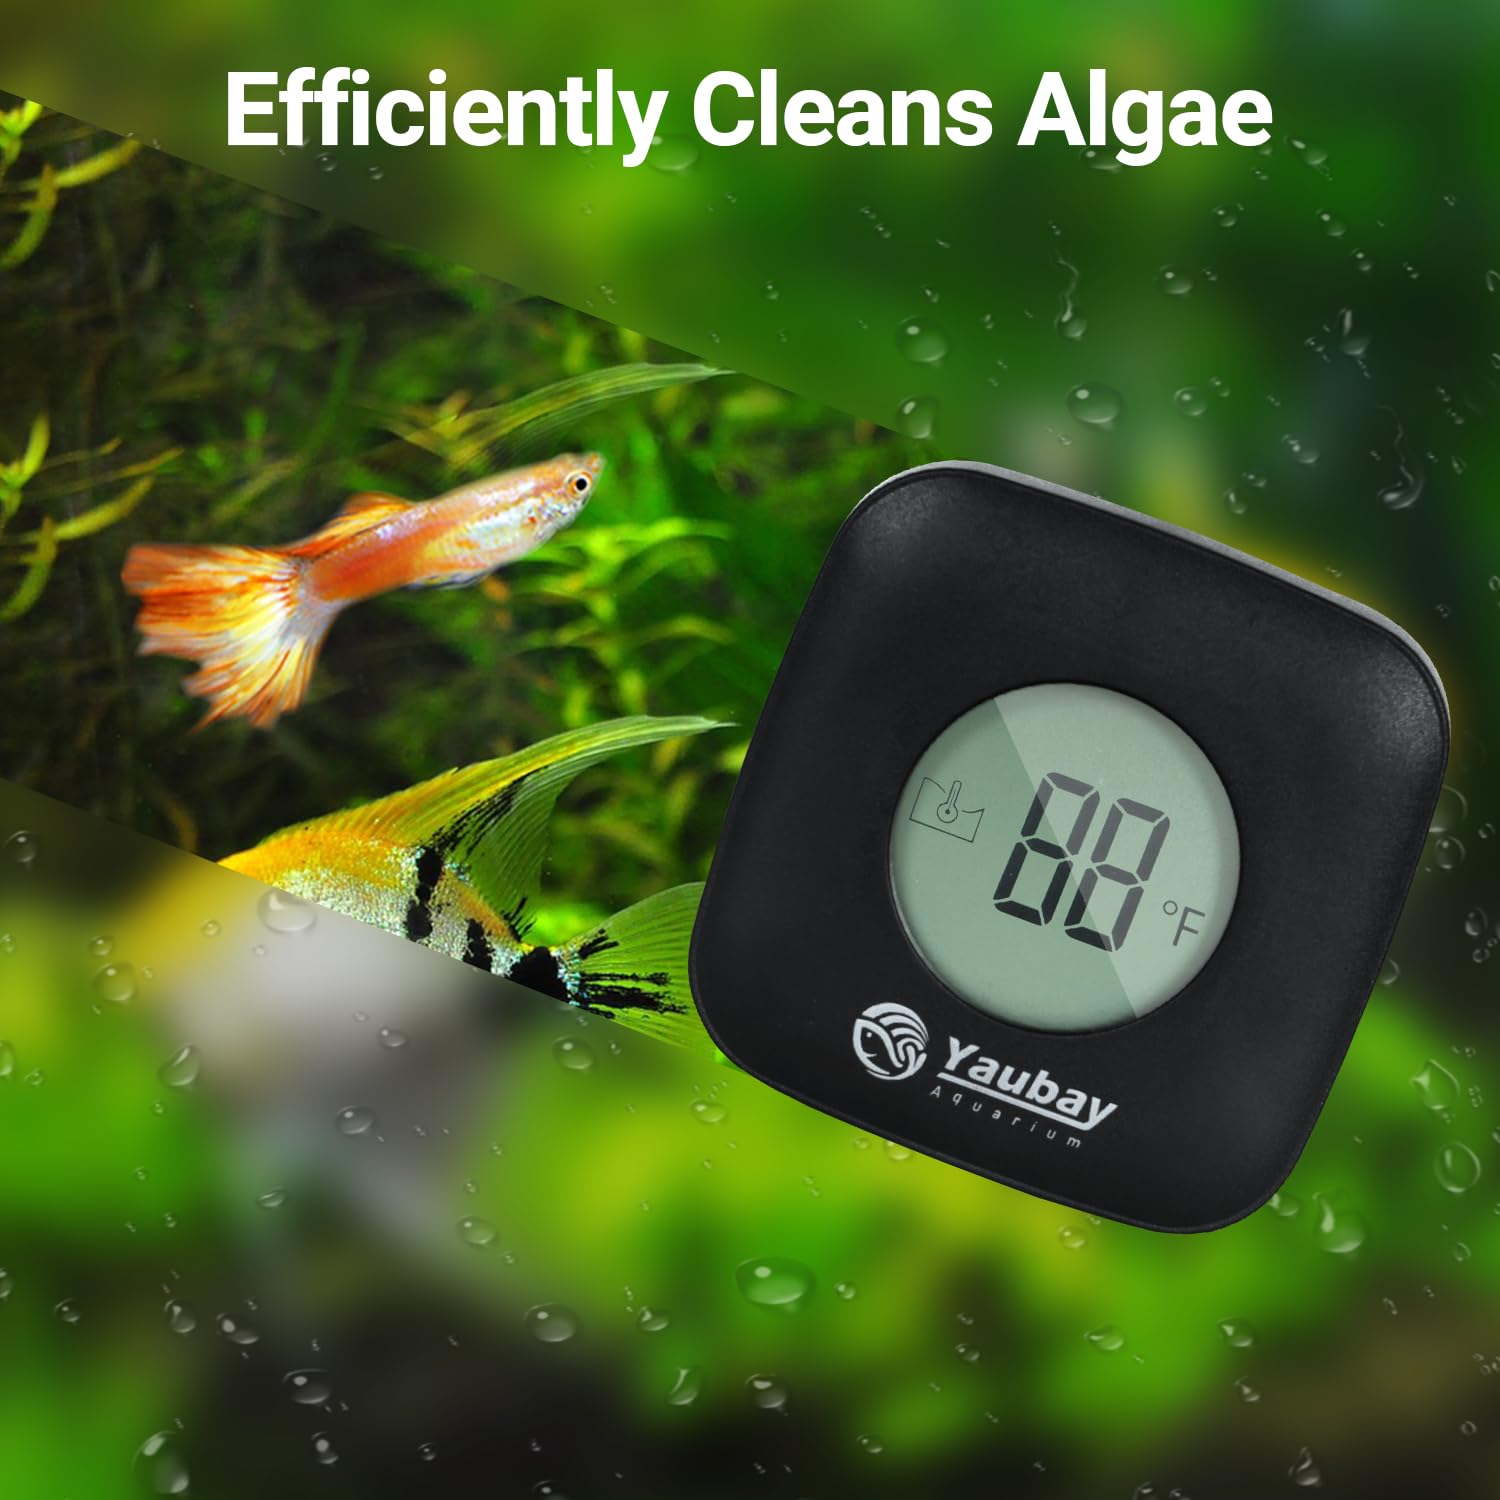 Yaubay Magnetic Aquarium Thermometer Glass Cleaner 2 in 1 Fish Tank Digital Temperature Gauge with Floating Algae Cleaner Brush Tool for Small 1/4 Inch Thick Glass Freshwater and Saltwater Tanks